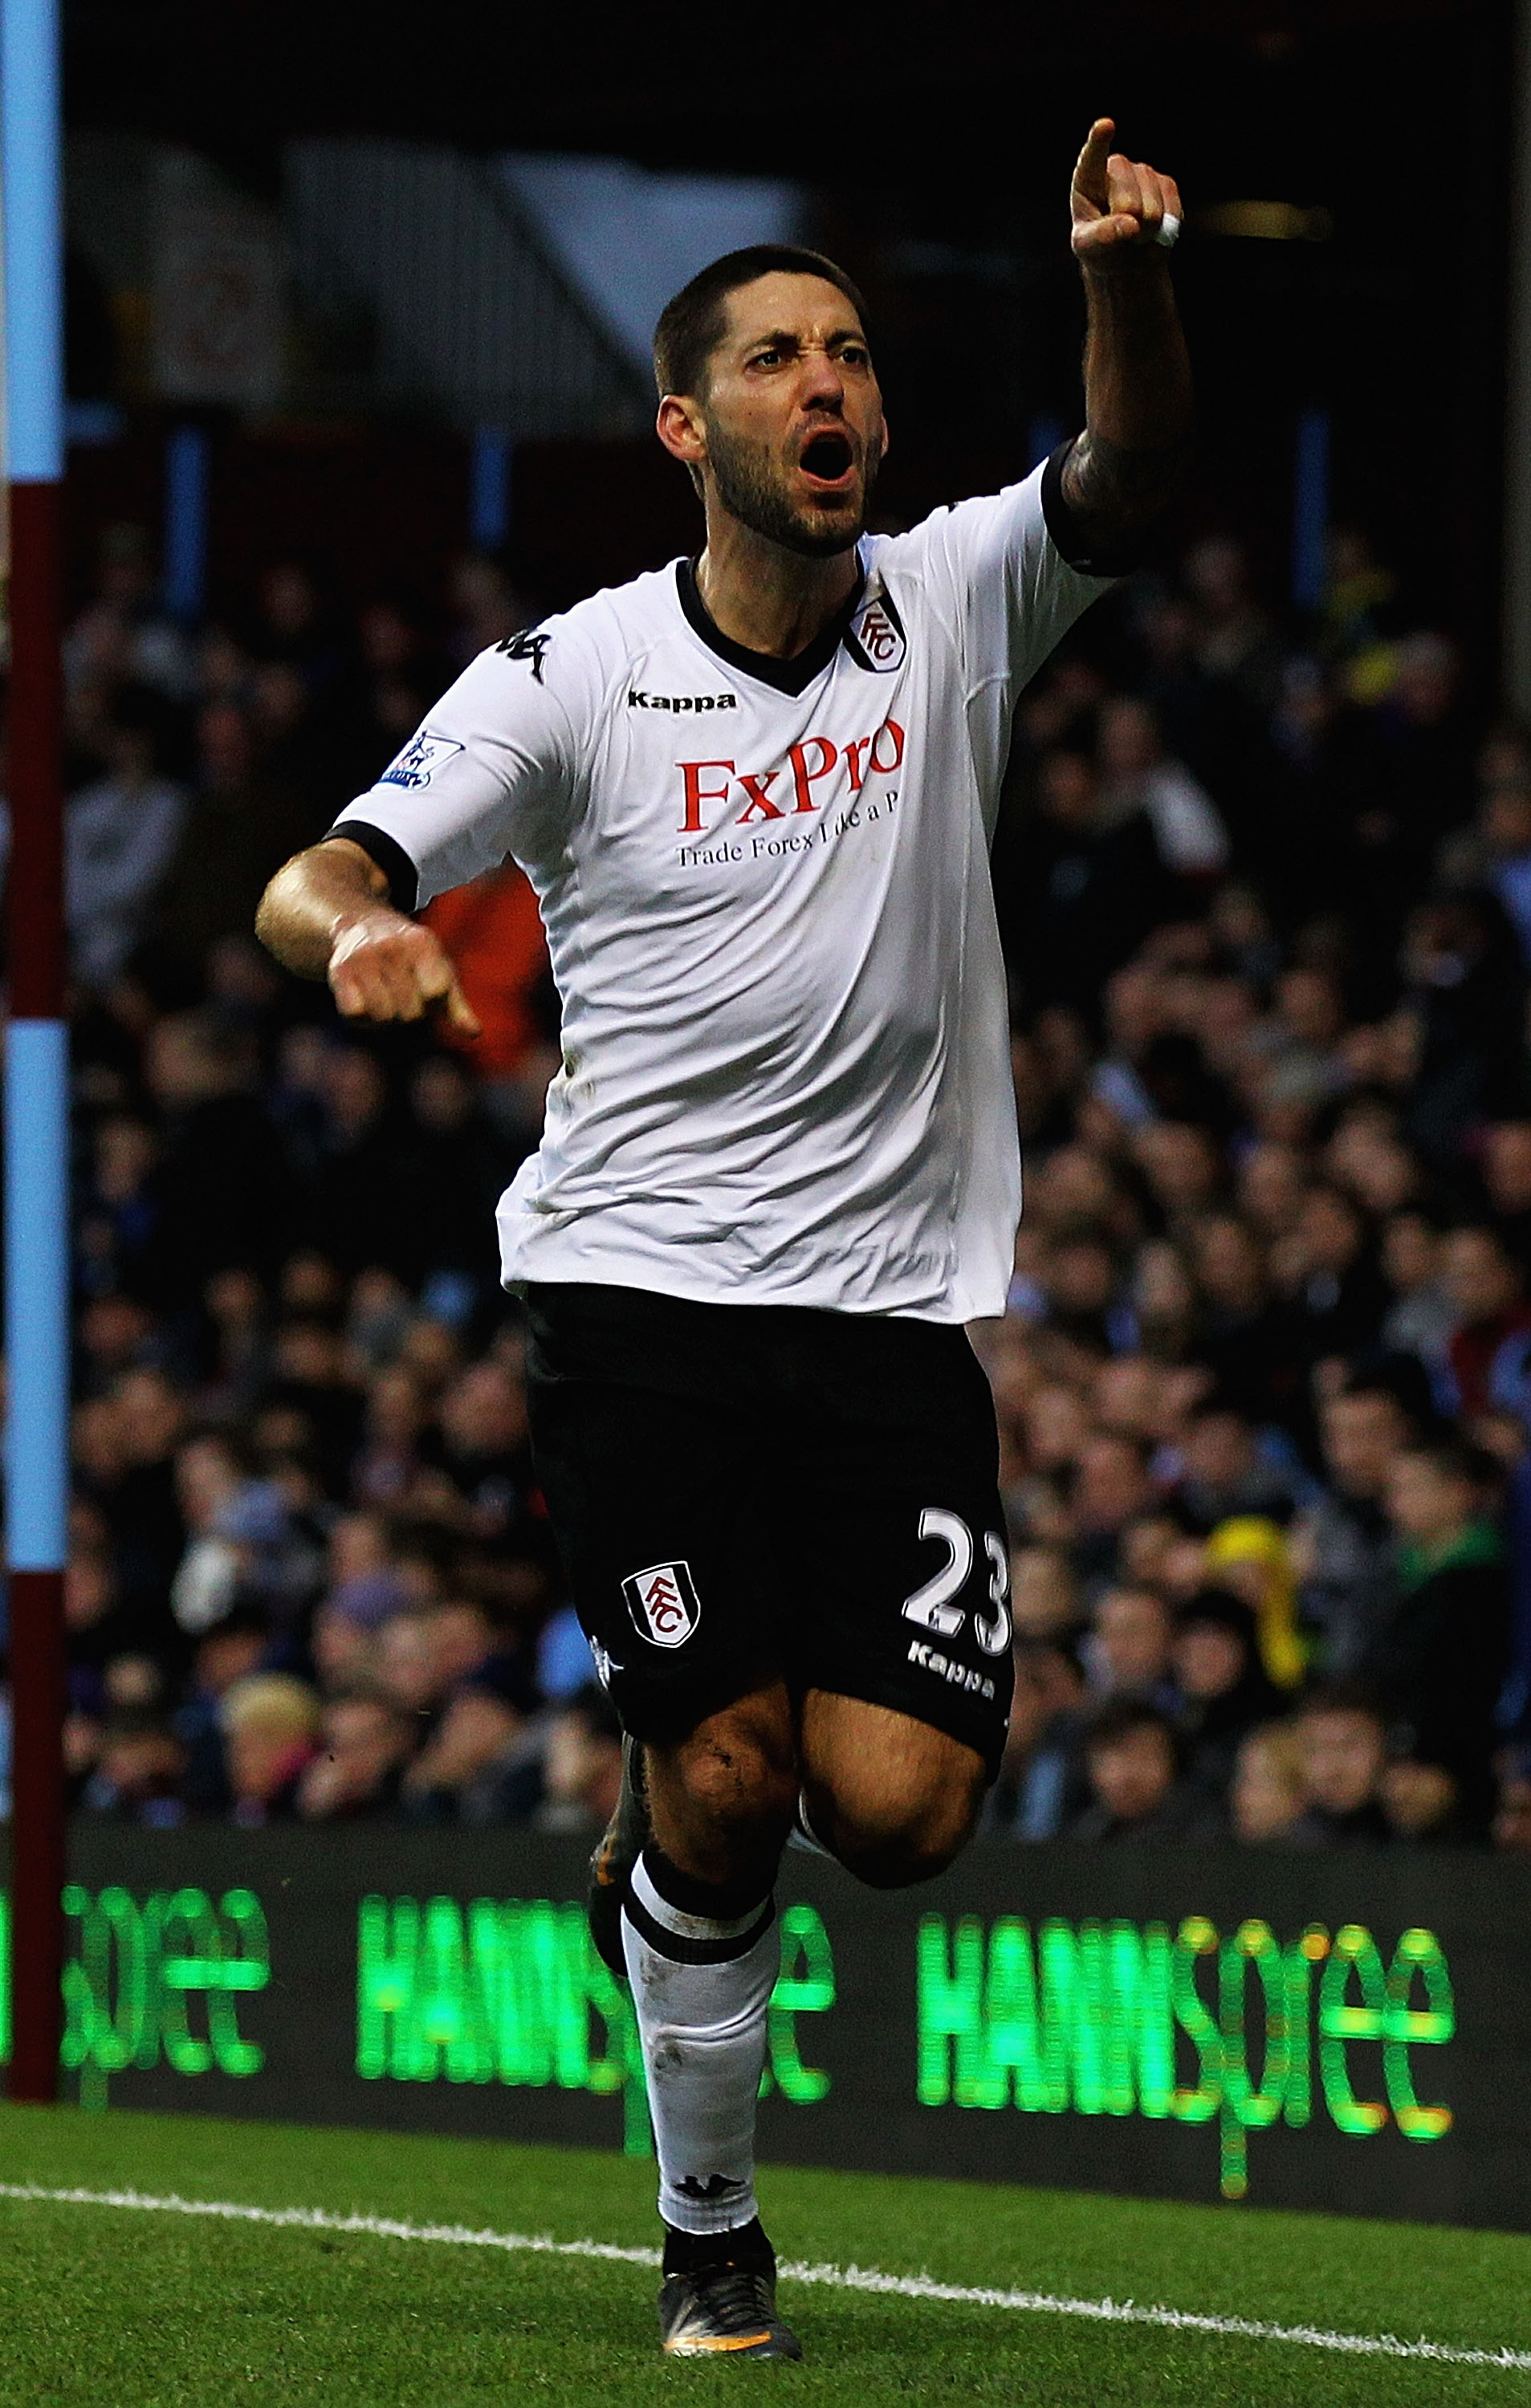 BIRMINGHAM, ENGLAND - FEBRUARY 05:  Clint Dempsey of Fulham celebrates his goal during the Barclays Premier League match between Aston Villa and Fulham at Villa Park on February 5, 2011 in Birmingham, England.  (Photo by Matthew Lewis/Getty Images)